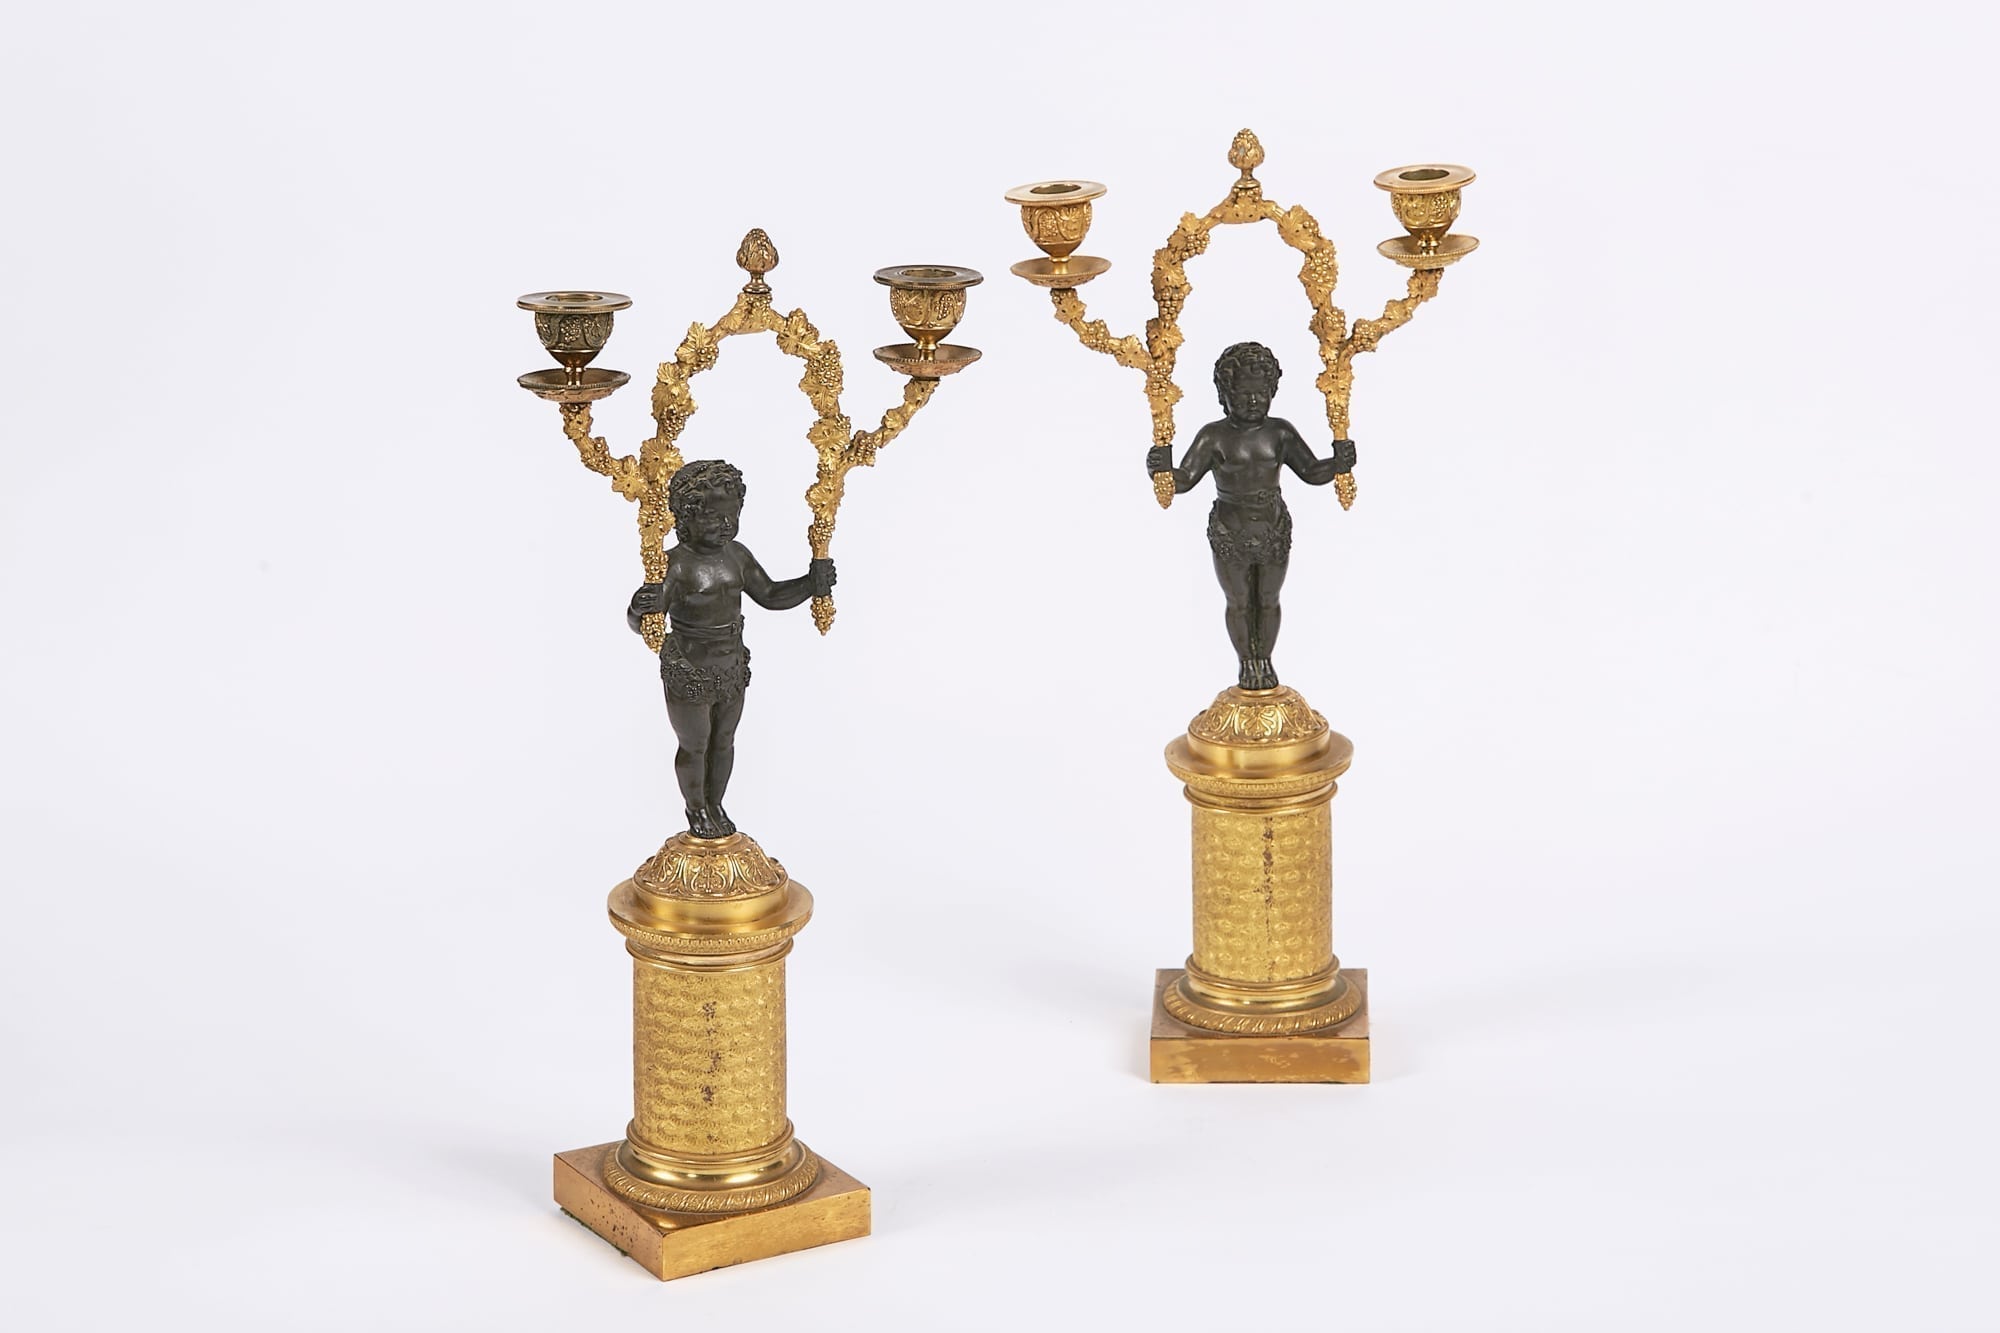 7898 - Early 19th Century English Regency Pair of Figural Bronze and Ormolu Two Branch Candelabra